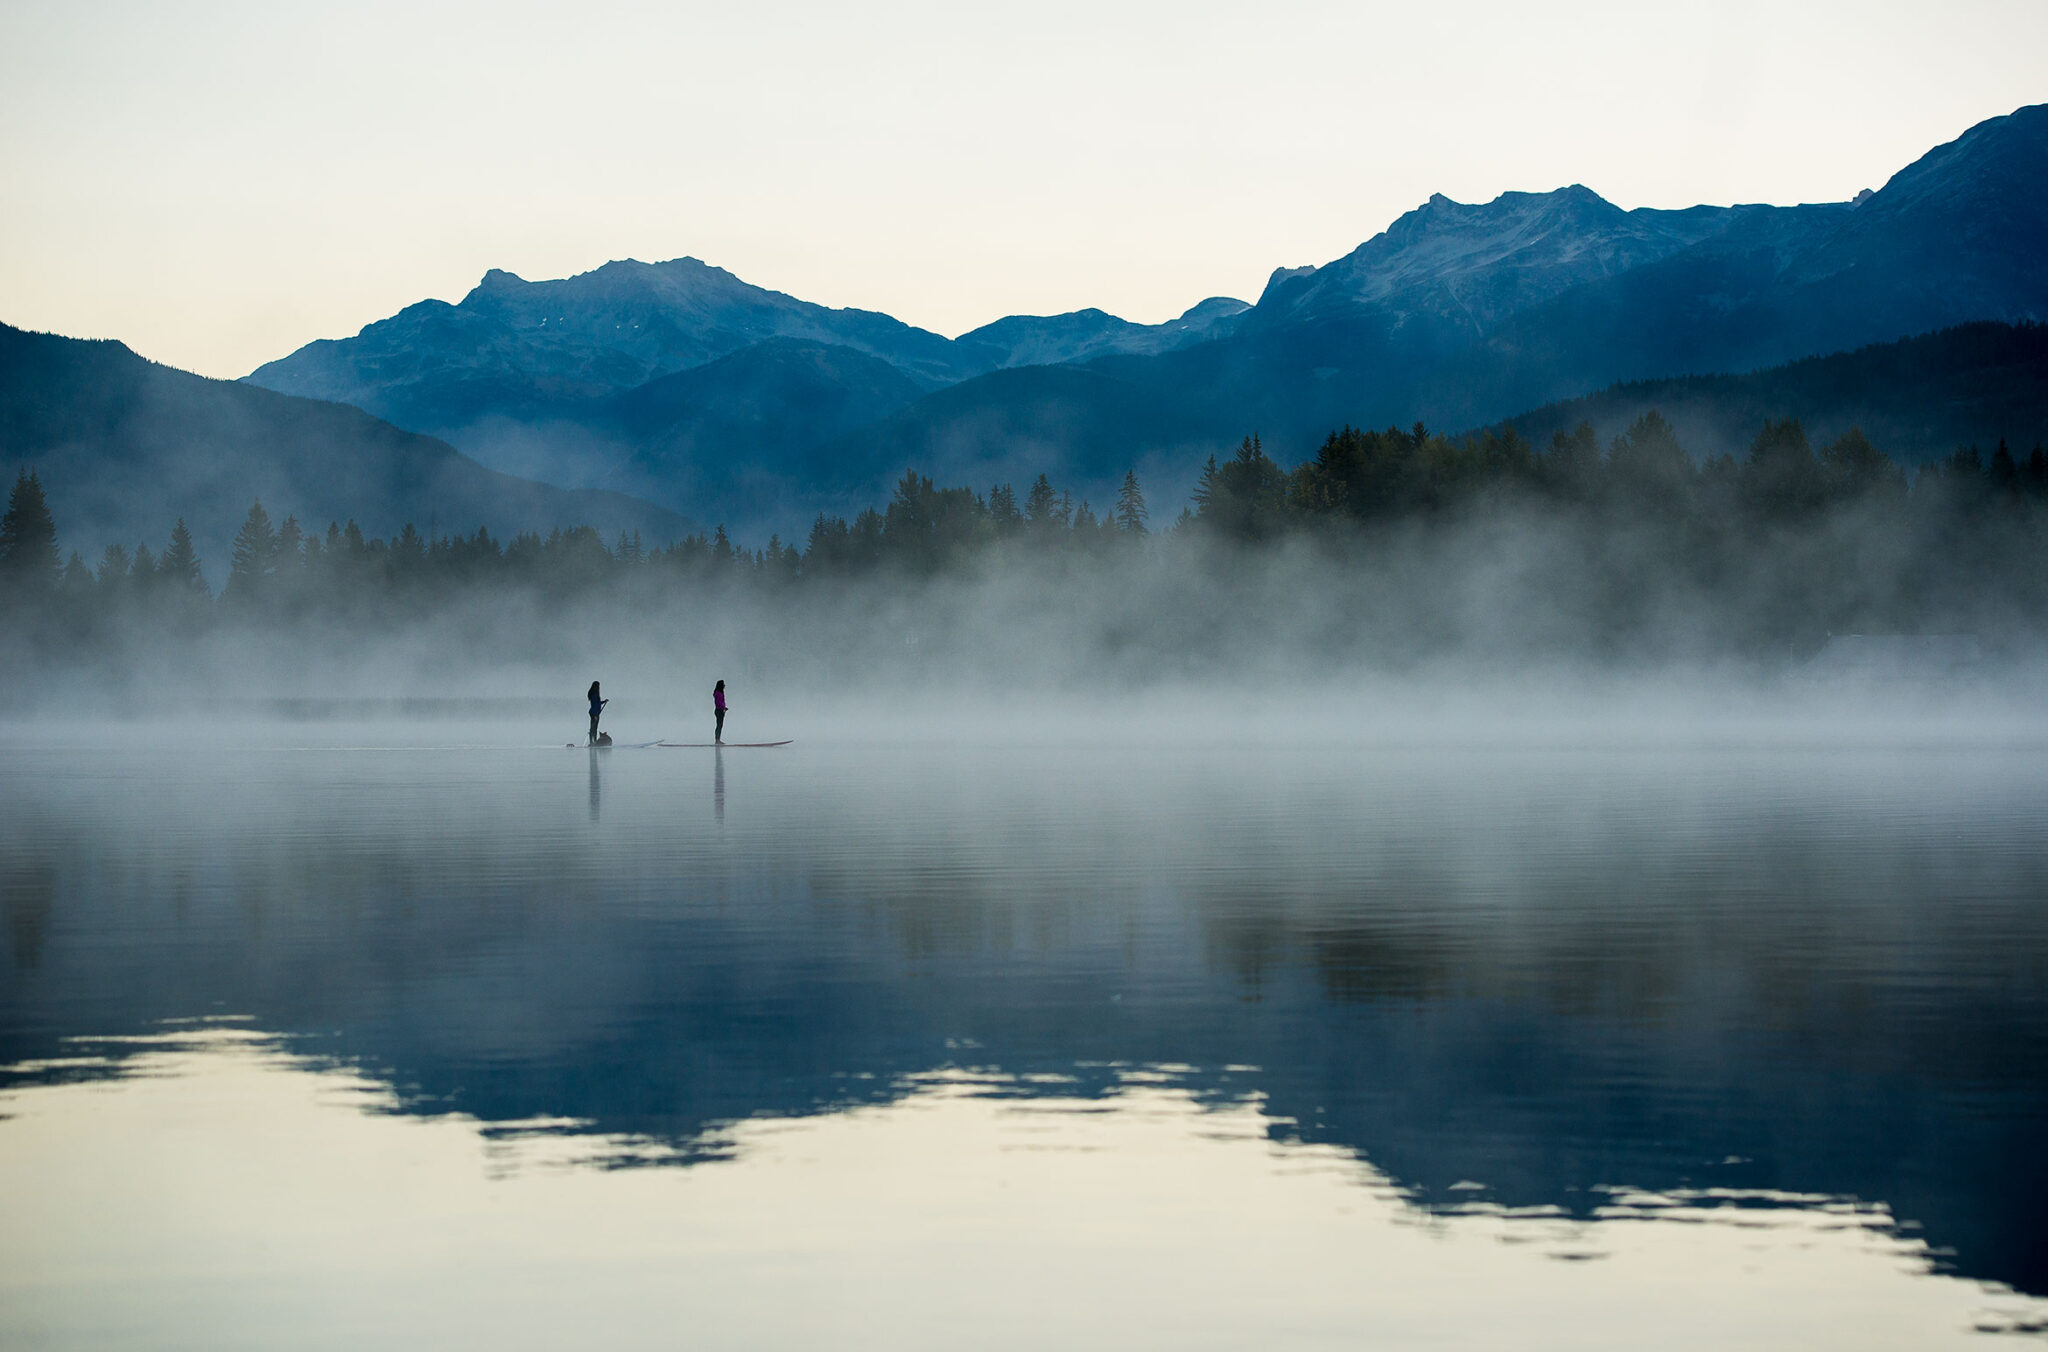 Paddle boarders on a lake in Whistler with the morning mist.